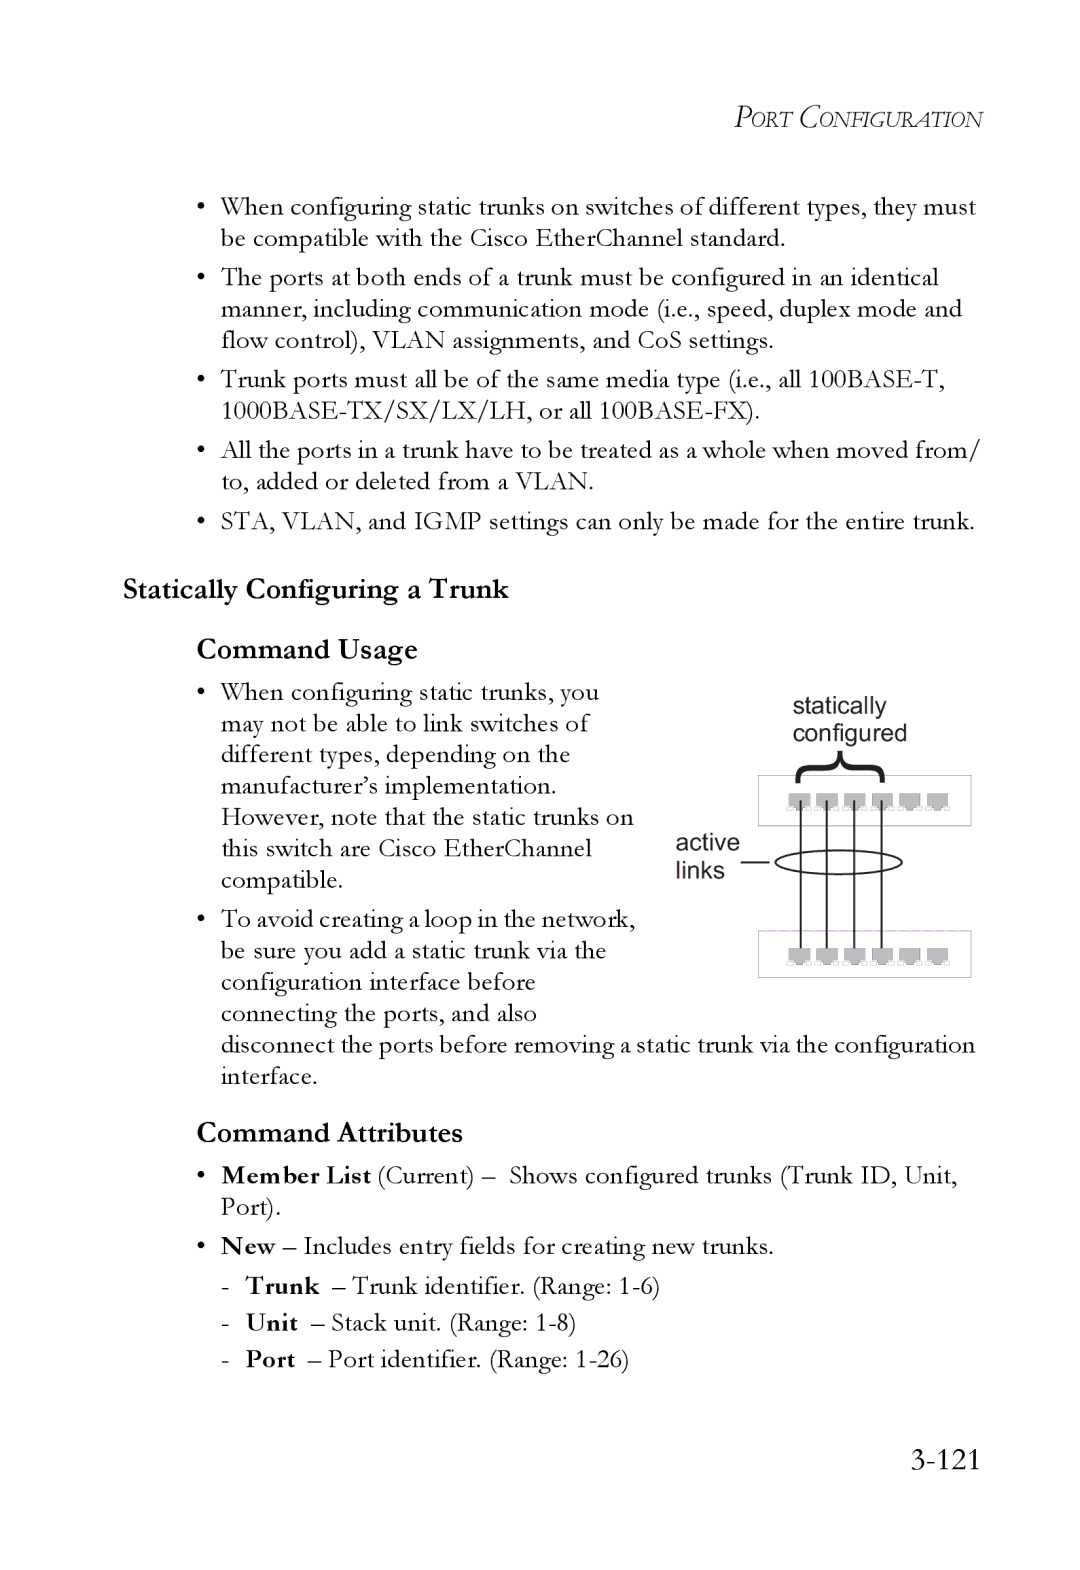 SMC Networks SMC6824M manual 121, Statically Configuring a Trunk Command Usage 